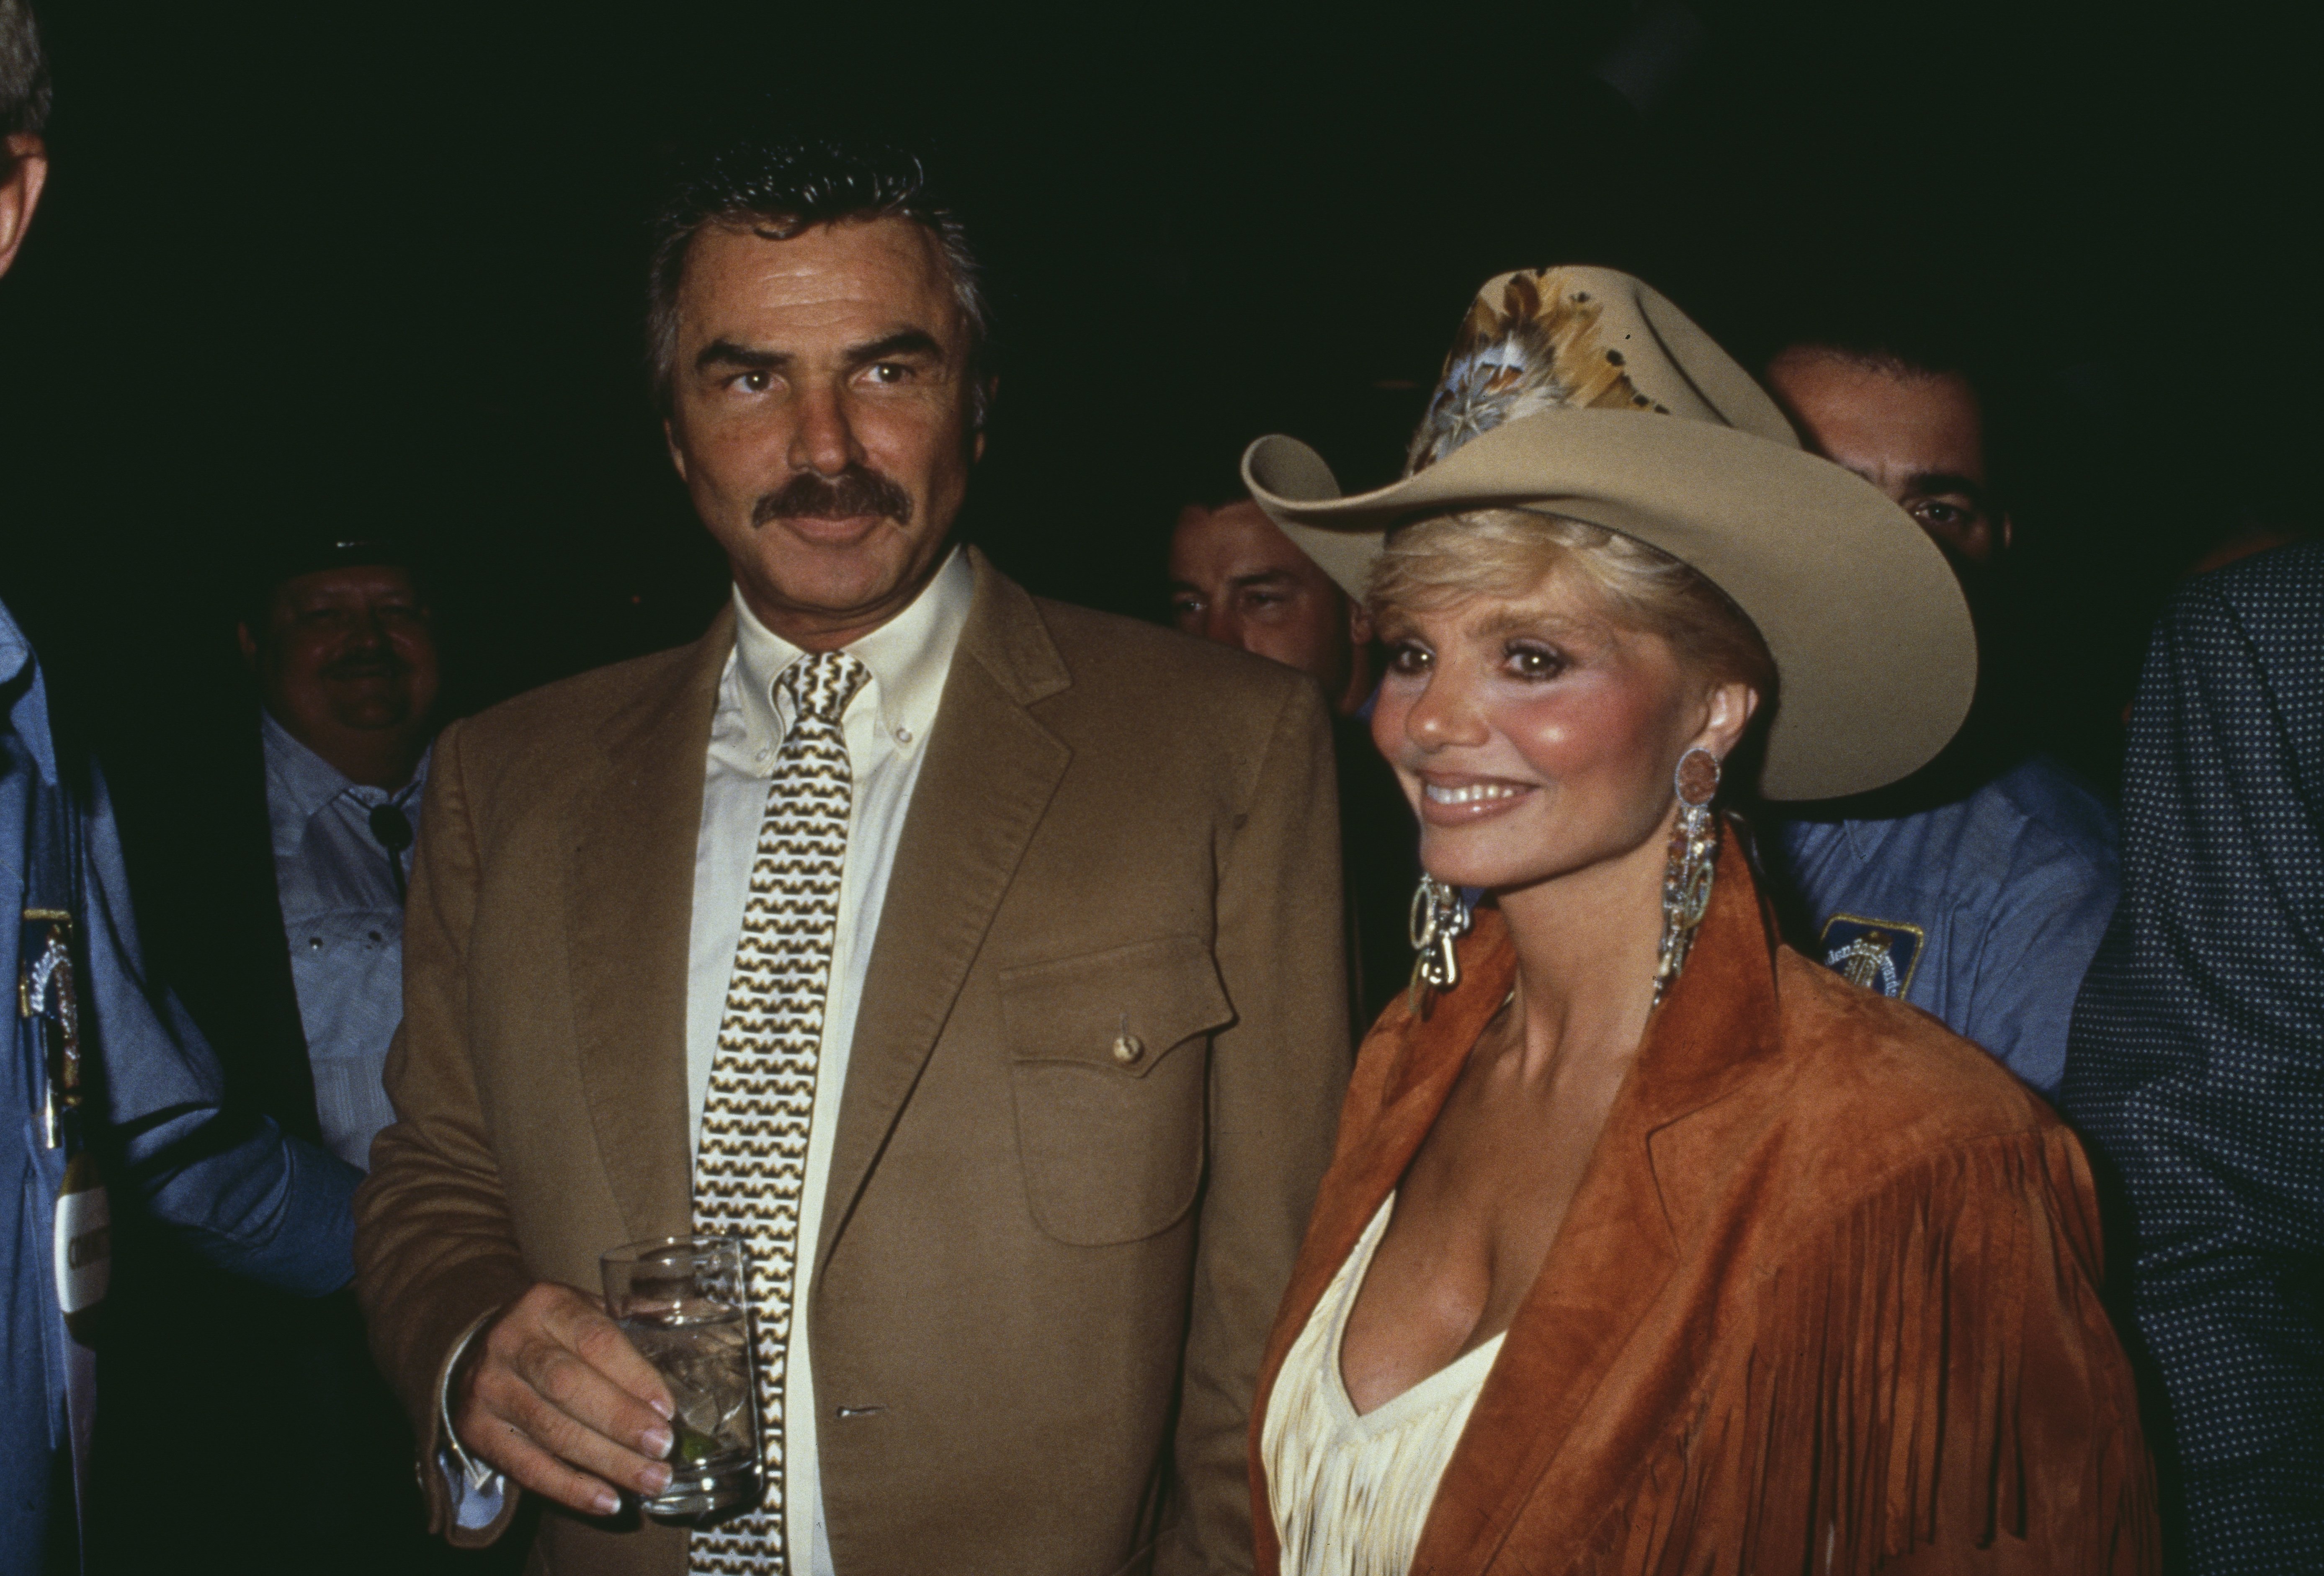 Burt Reynolds and Loni Anderson during the Motion Picture & Television Fund's 8th Annual Golden Boot Awards at the Century Plaza Hotel on July 28 1990 in Los Angeles, California. / Source: Getty Images